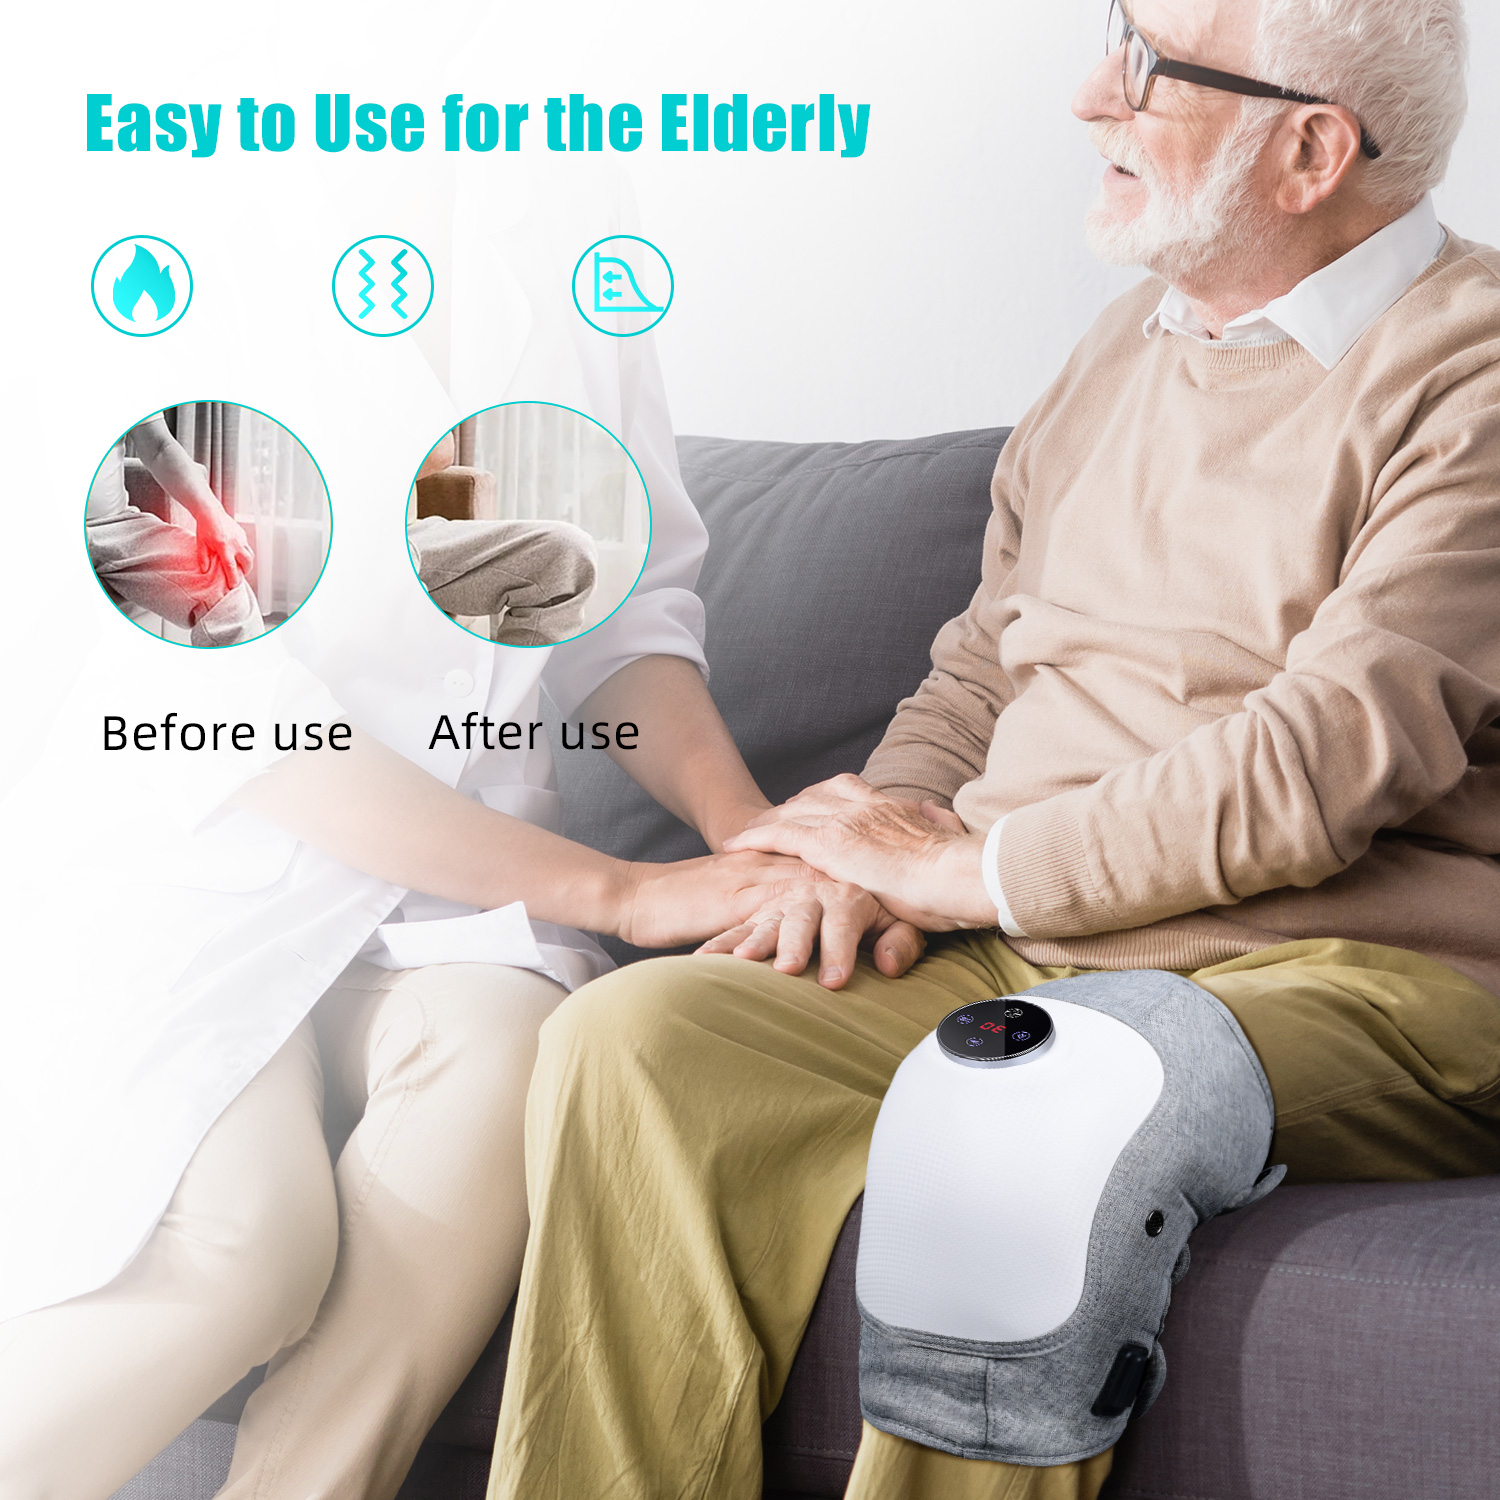 Meeegou over Knee Massager Physiotherapy Instrument for Joint Pain，Laser Infrared Heating Arthrosis Massage Vibrator Machine